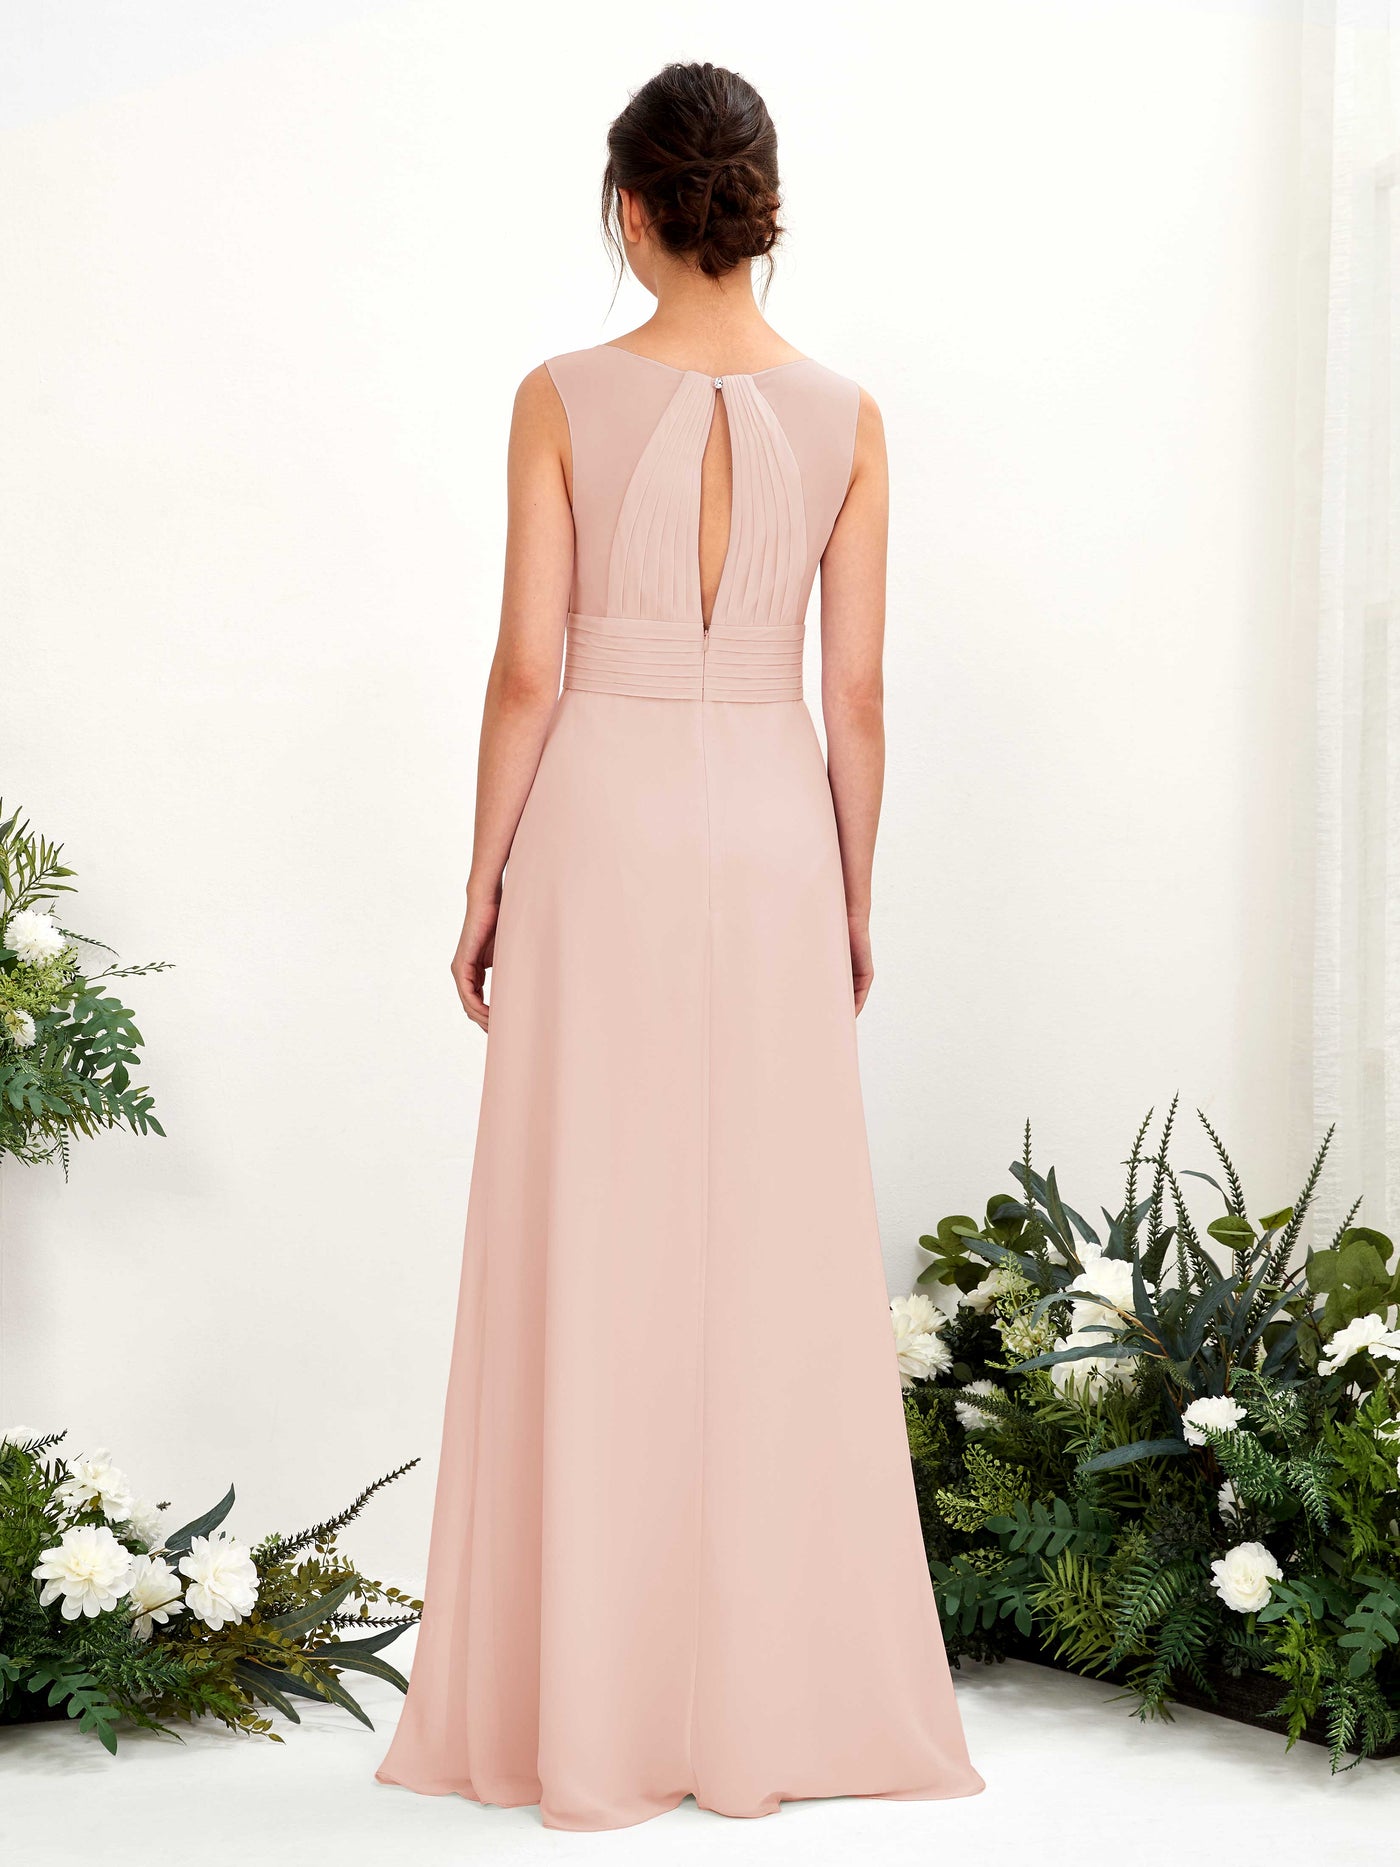 Pearl Pink Bridesmaid Dresses Bridesmaid Dress A-line Chiffon Straps Full Length Sleeveless Wedding Party Dress (81220908)#color_pearl-pink